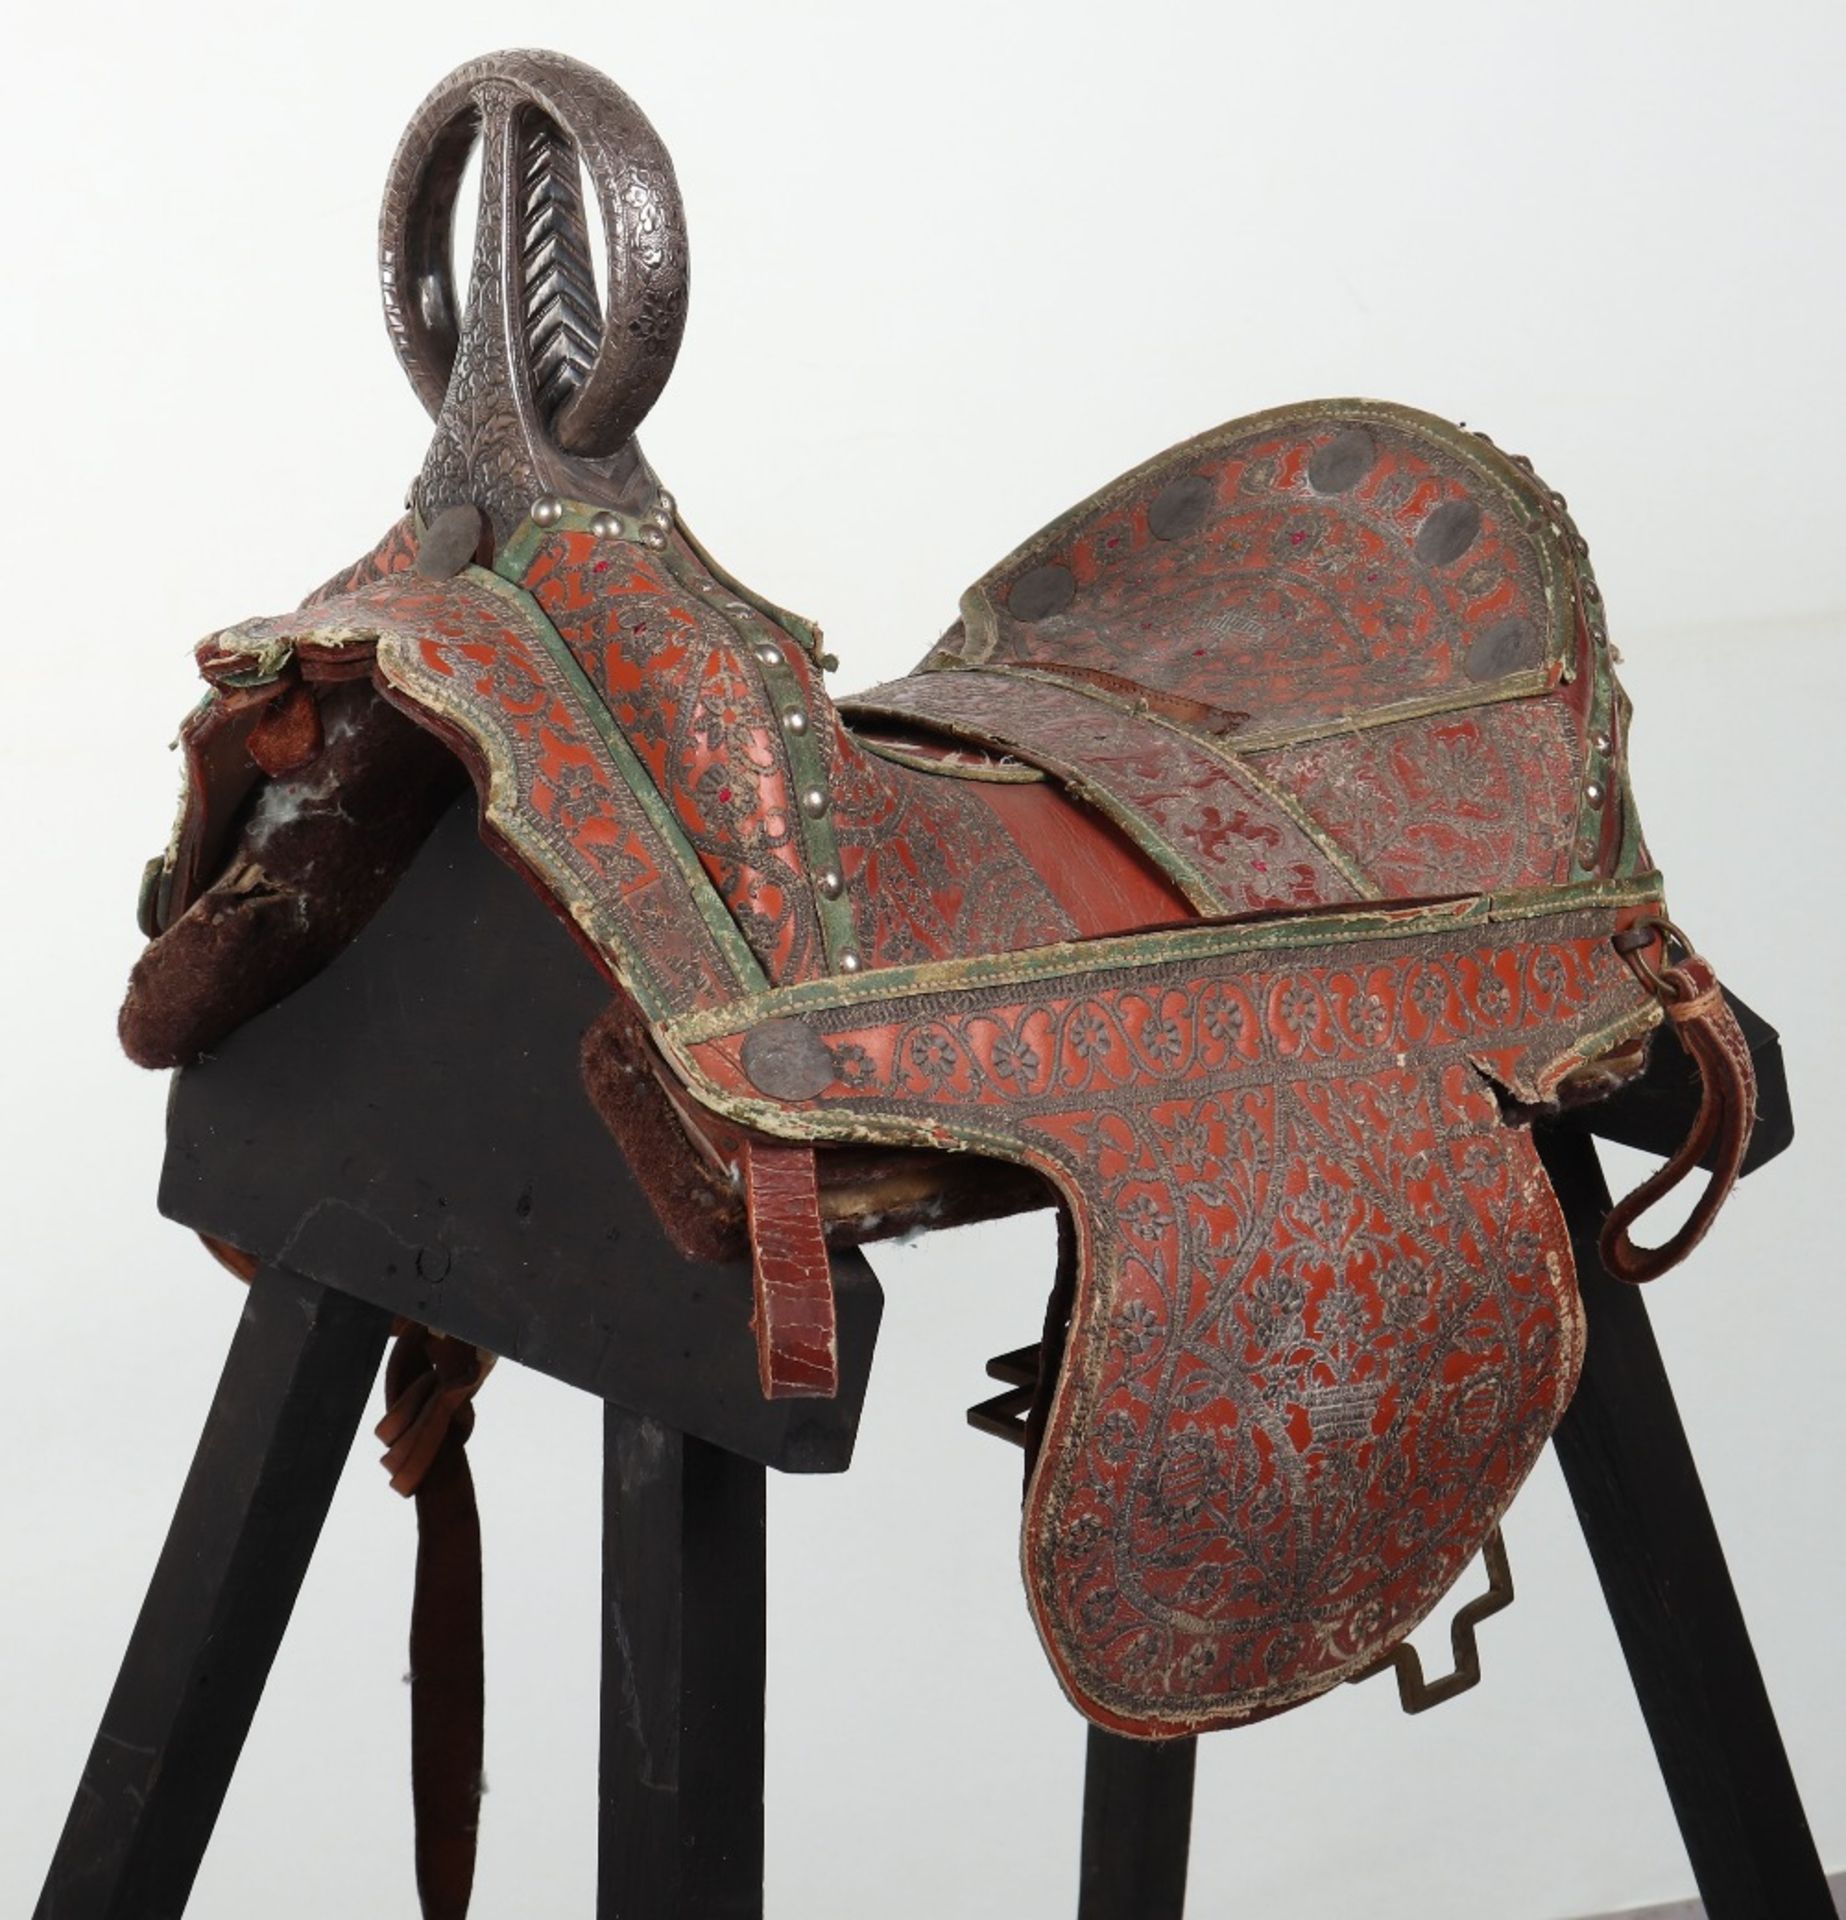 Fine and Scarce North Indian Saddle, Probably Late 19th or Early 20th Century - Image 2 of 12